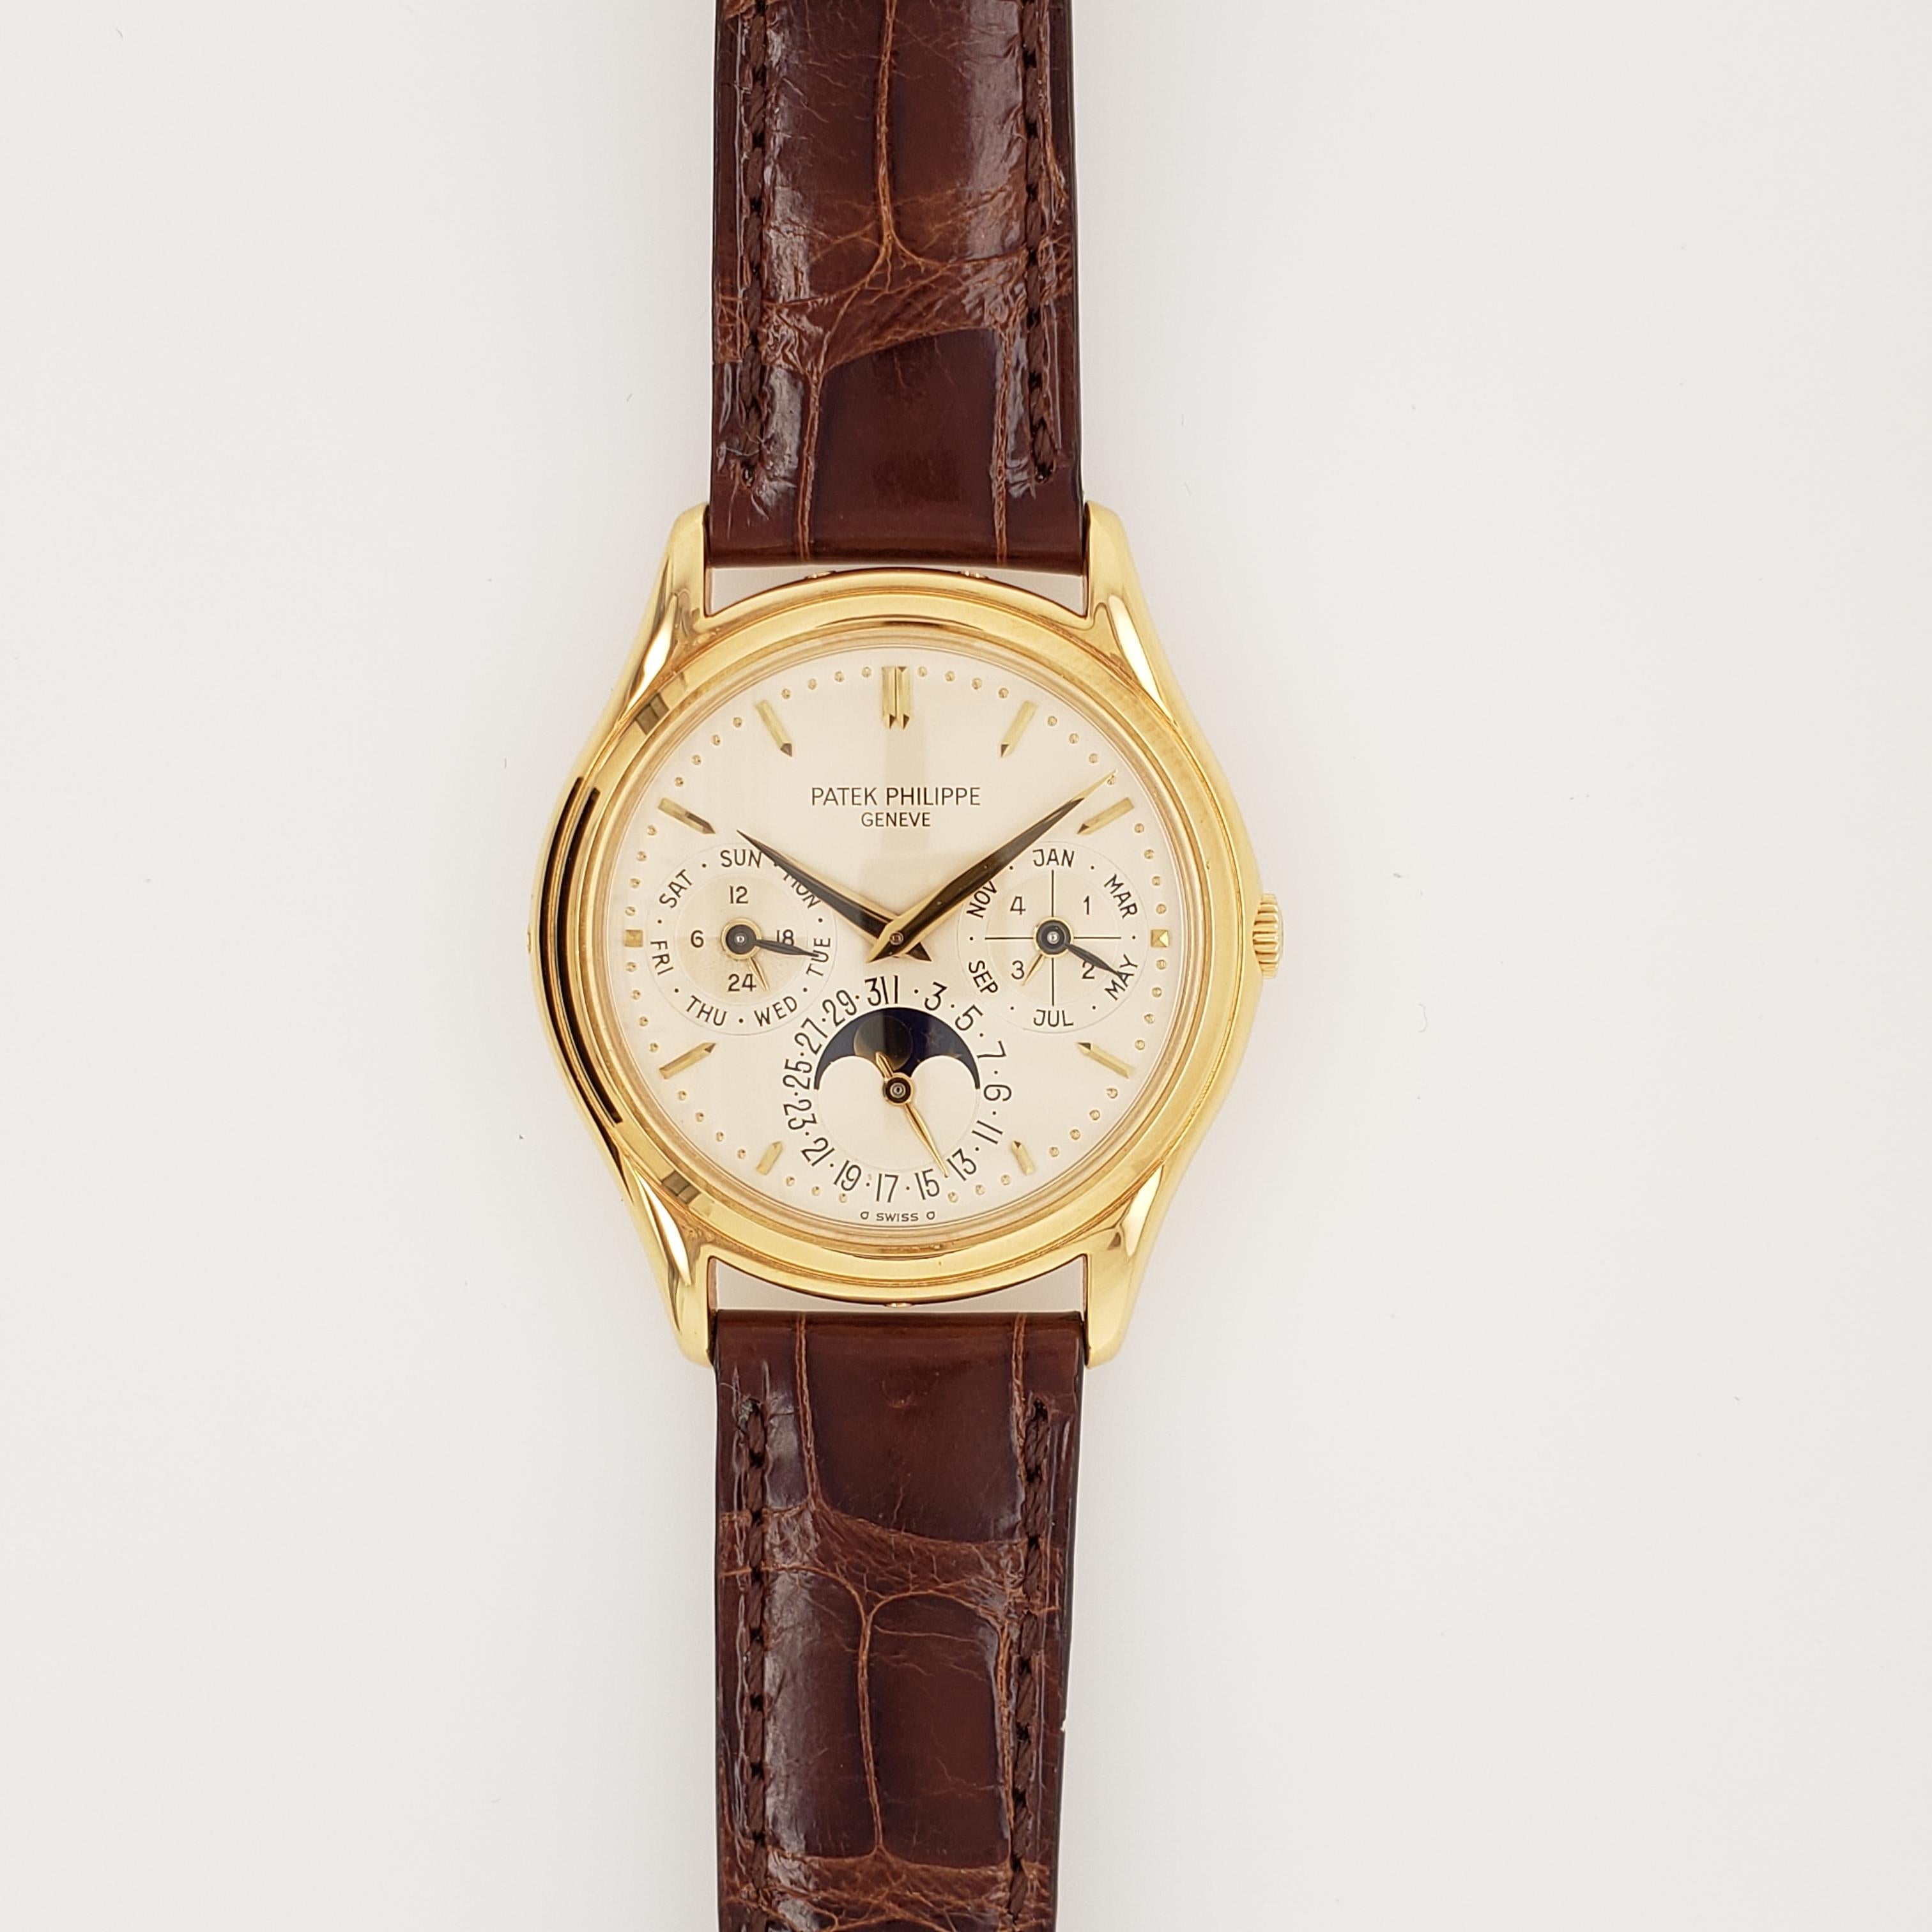 18K Rose Gold Patek Philippe Annual Calendar, Reference # 5396R-012. The watch features Moonphase, Day, Month and Date apertures. The watch is displayed on brown alligator strap with 18k Rose Gold Patek Philippe deployment  buckle. Watch is in mint,